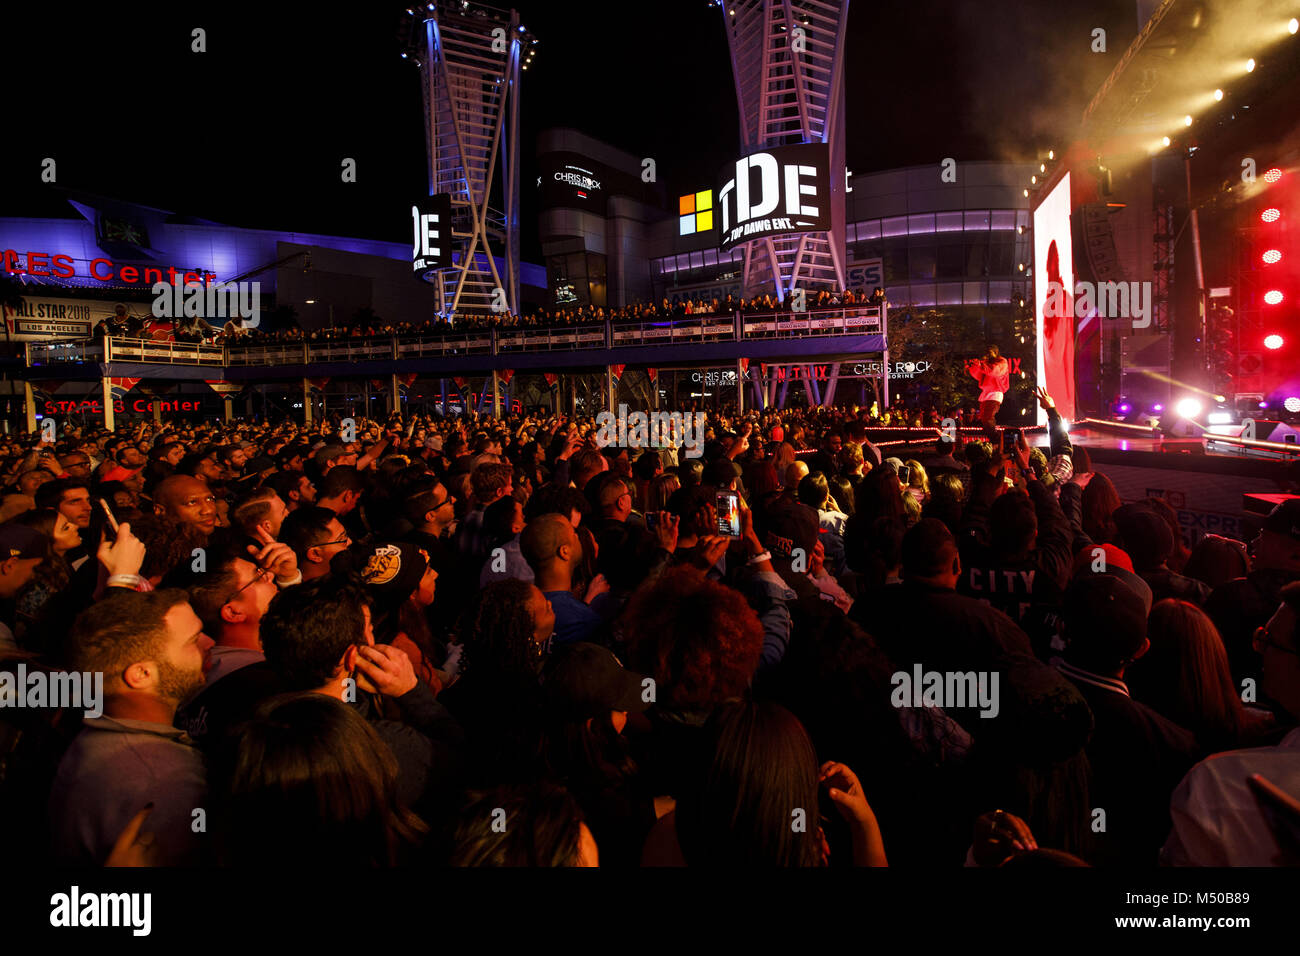 Los Angeles, CA, USA. 16th Feb, 2018. Fans react as artist Kendrick Lamar  performs at L.A. Live during the NBA All-Stars weekend road show concert on  Friday, February 16, 2018 in downtown